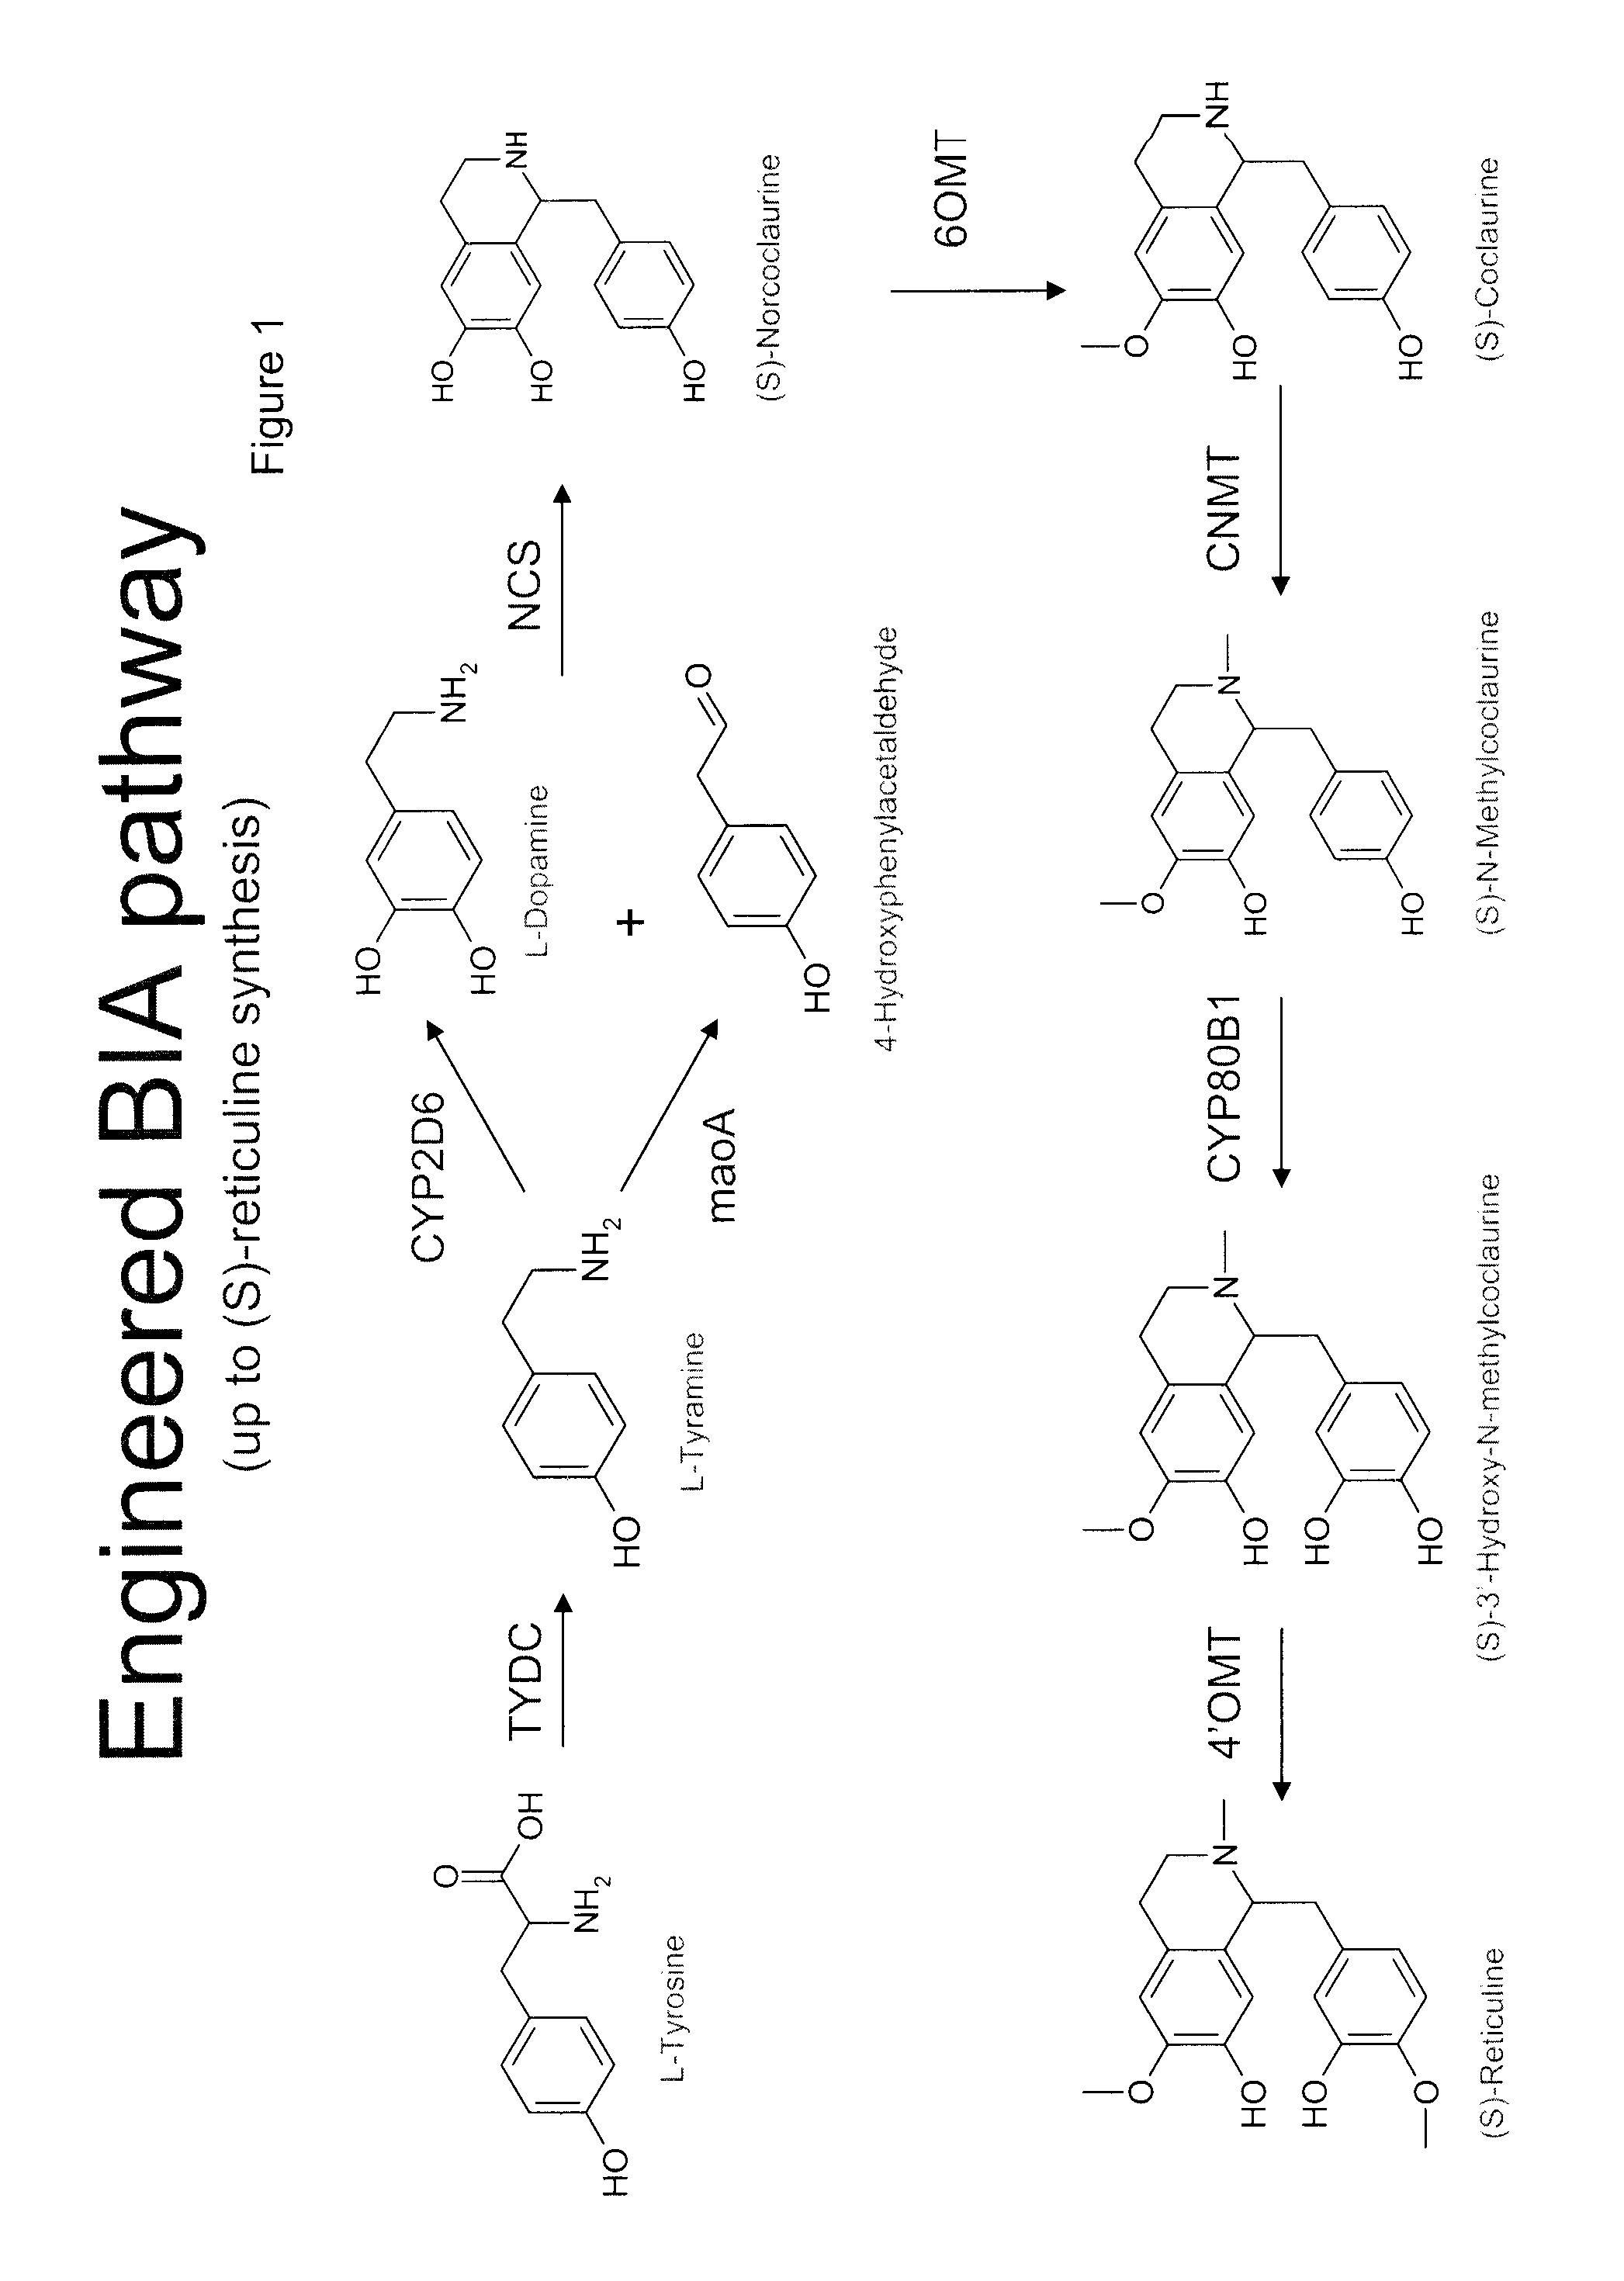 Compositions and methods for producing benzylisoquinoline alkaloids